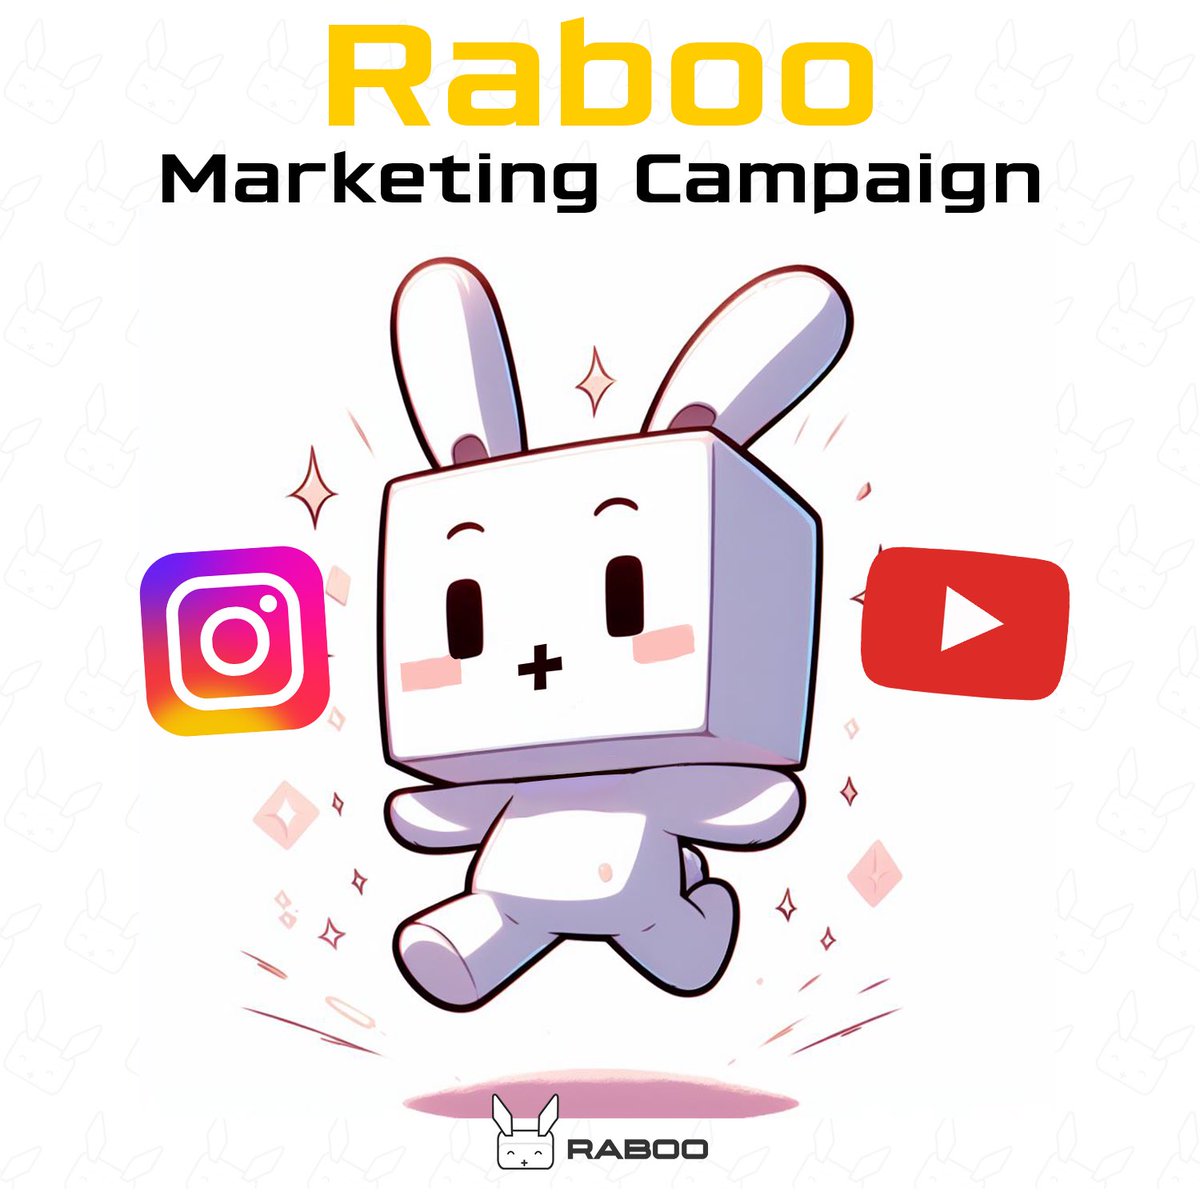 Raboo is gearing up for a major marketing push, including Instagram promotions, a big YouTube campaign, generous giveaways, and exciting surprise bonuses for the community. For more detailed information, Join our Telegram Telegram: t.me/RabootokenPort… #marketing #RABT